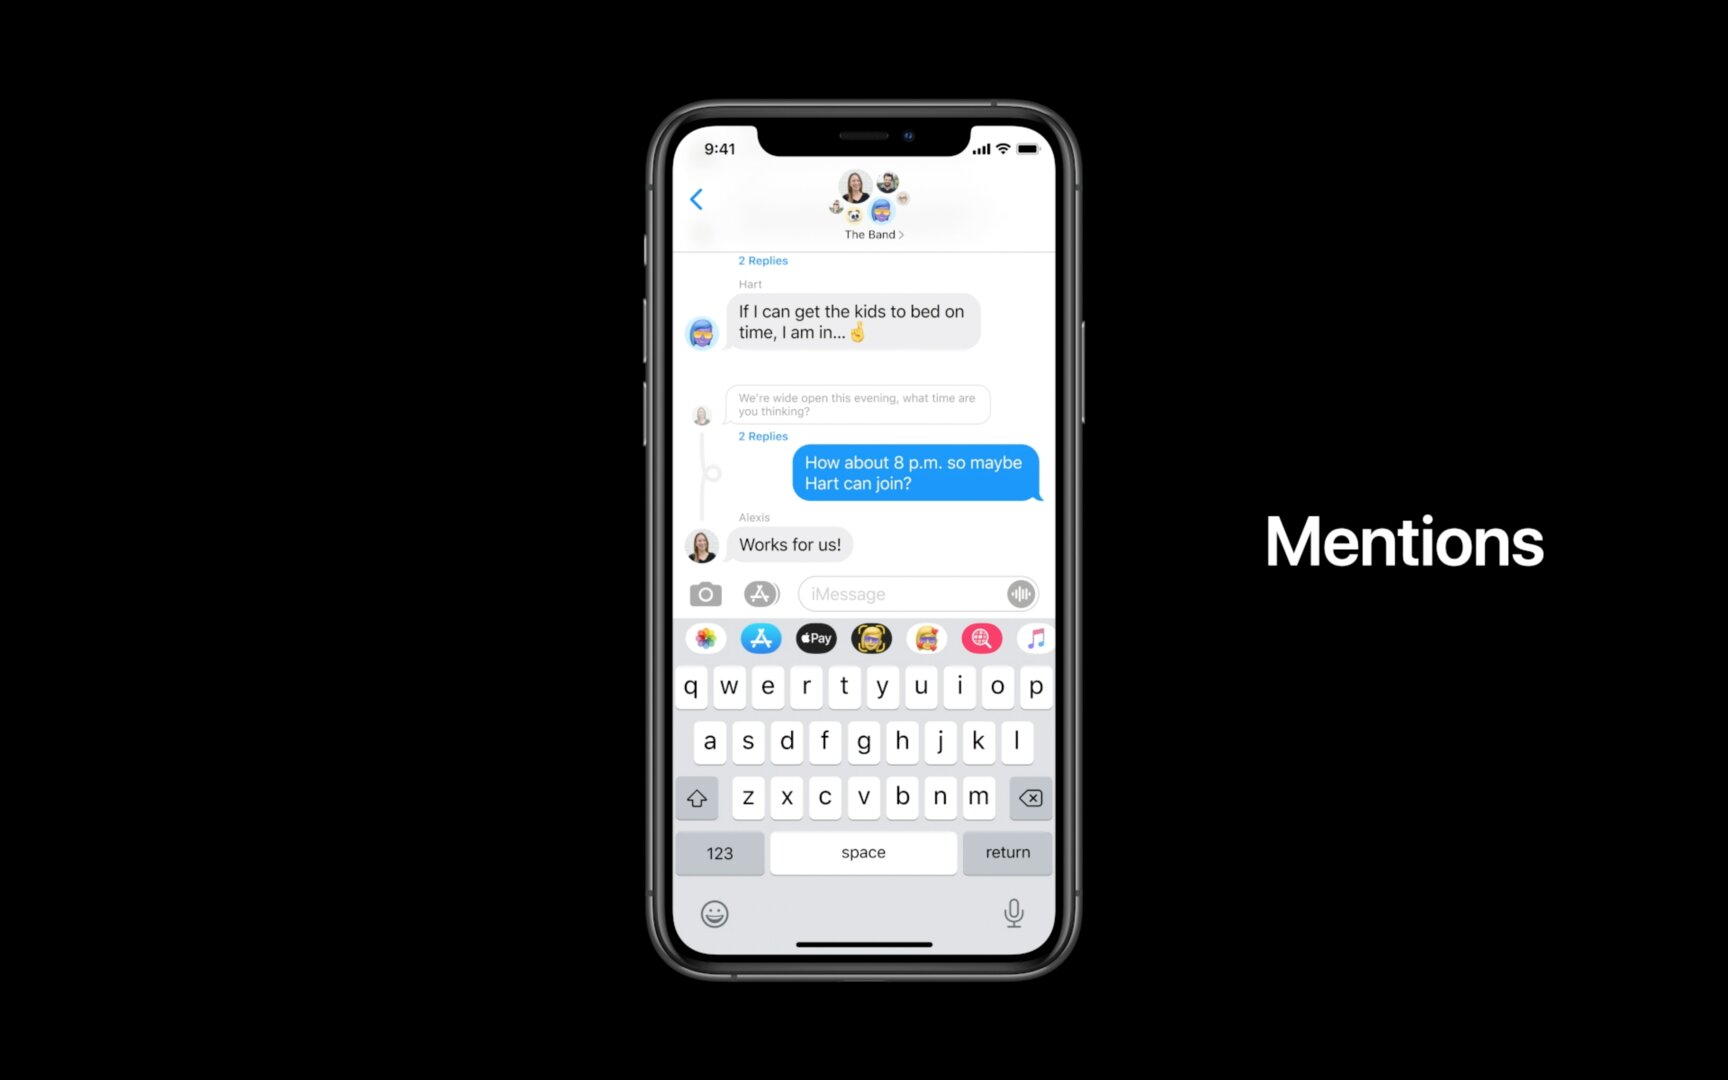 iMessage in iOS 14: Mentions